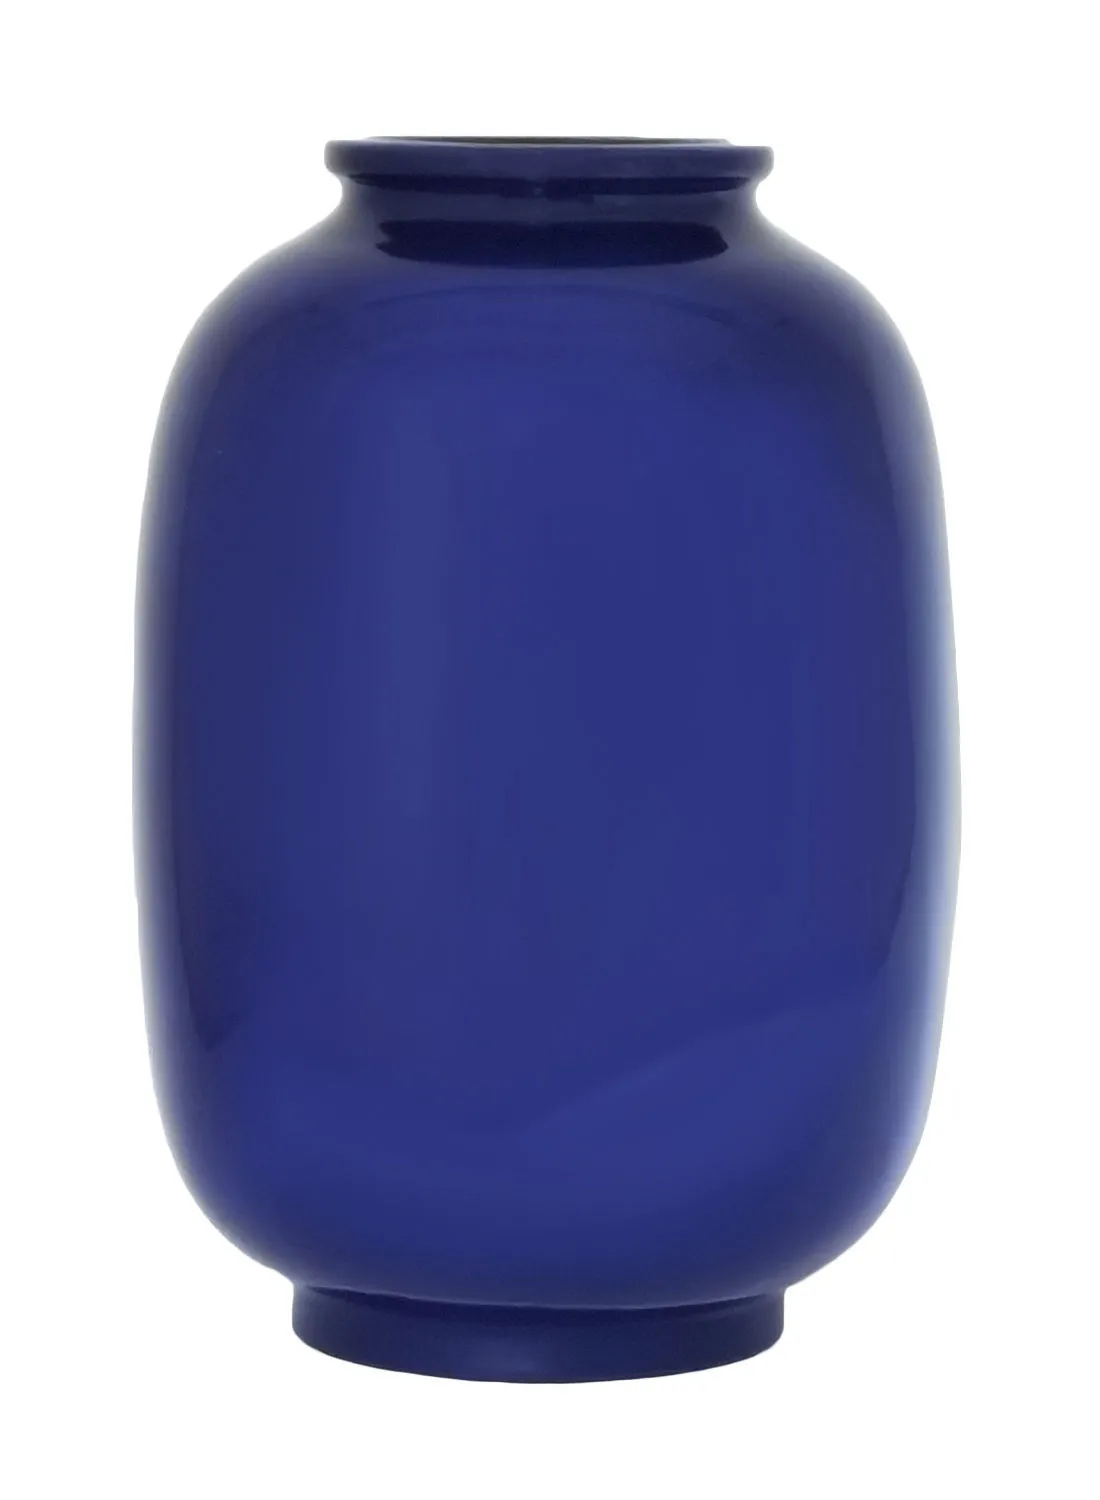 ebb & flow Classic Artistic Shape Ceramic Vase Unique Luxury Quality Material For The Perfect Stylish Home N13-012 Blue 31.5 x 46cm